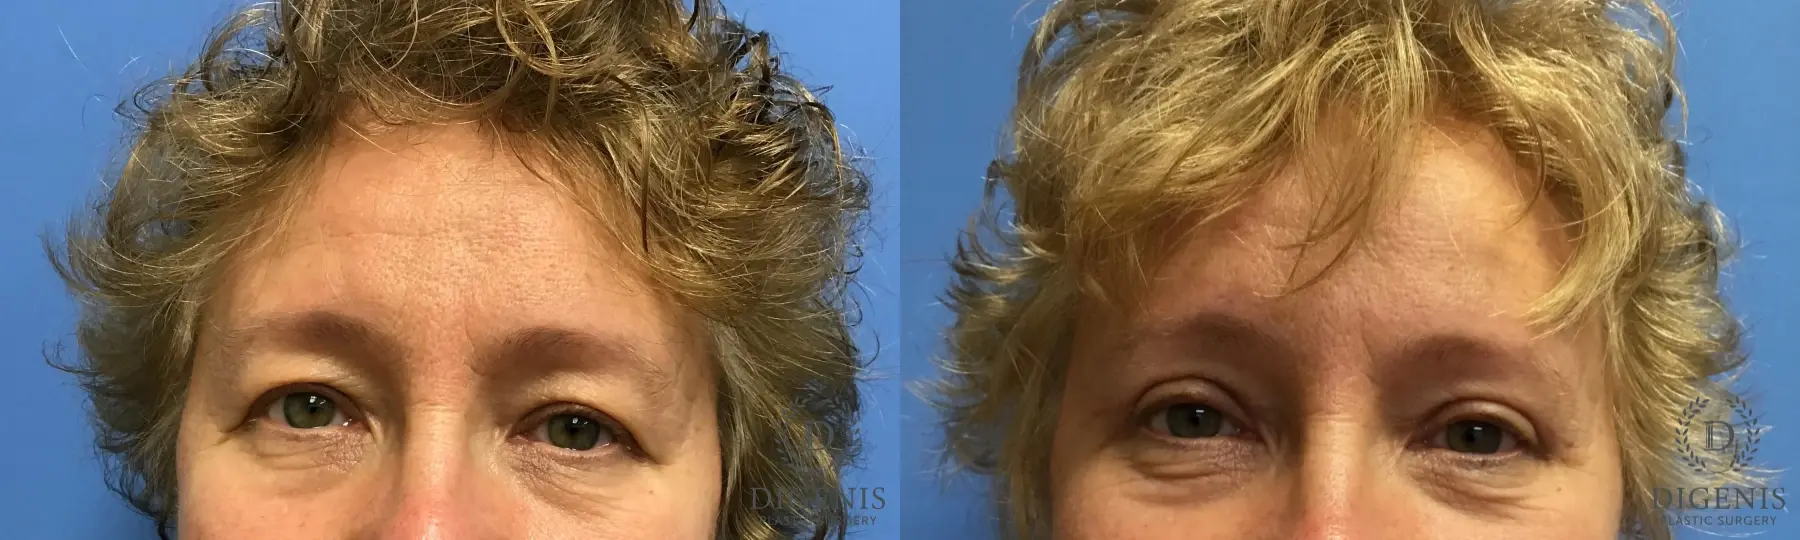 Eyelid Surgery: Patient 4 - Before and After 1